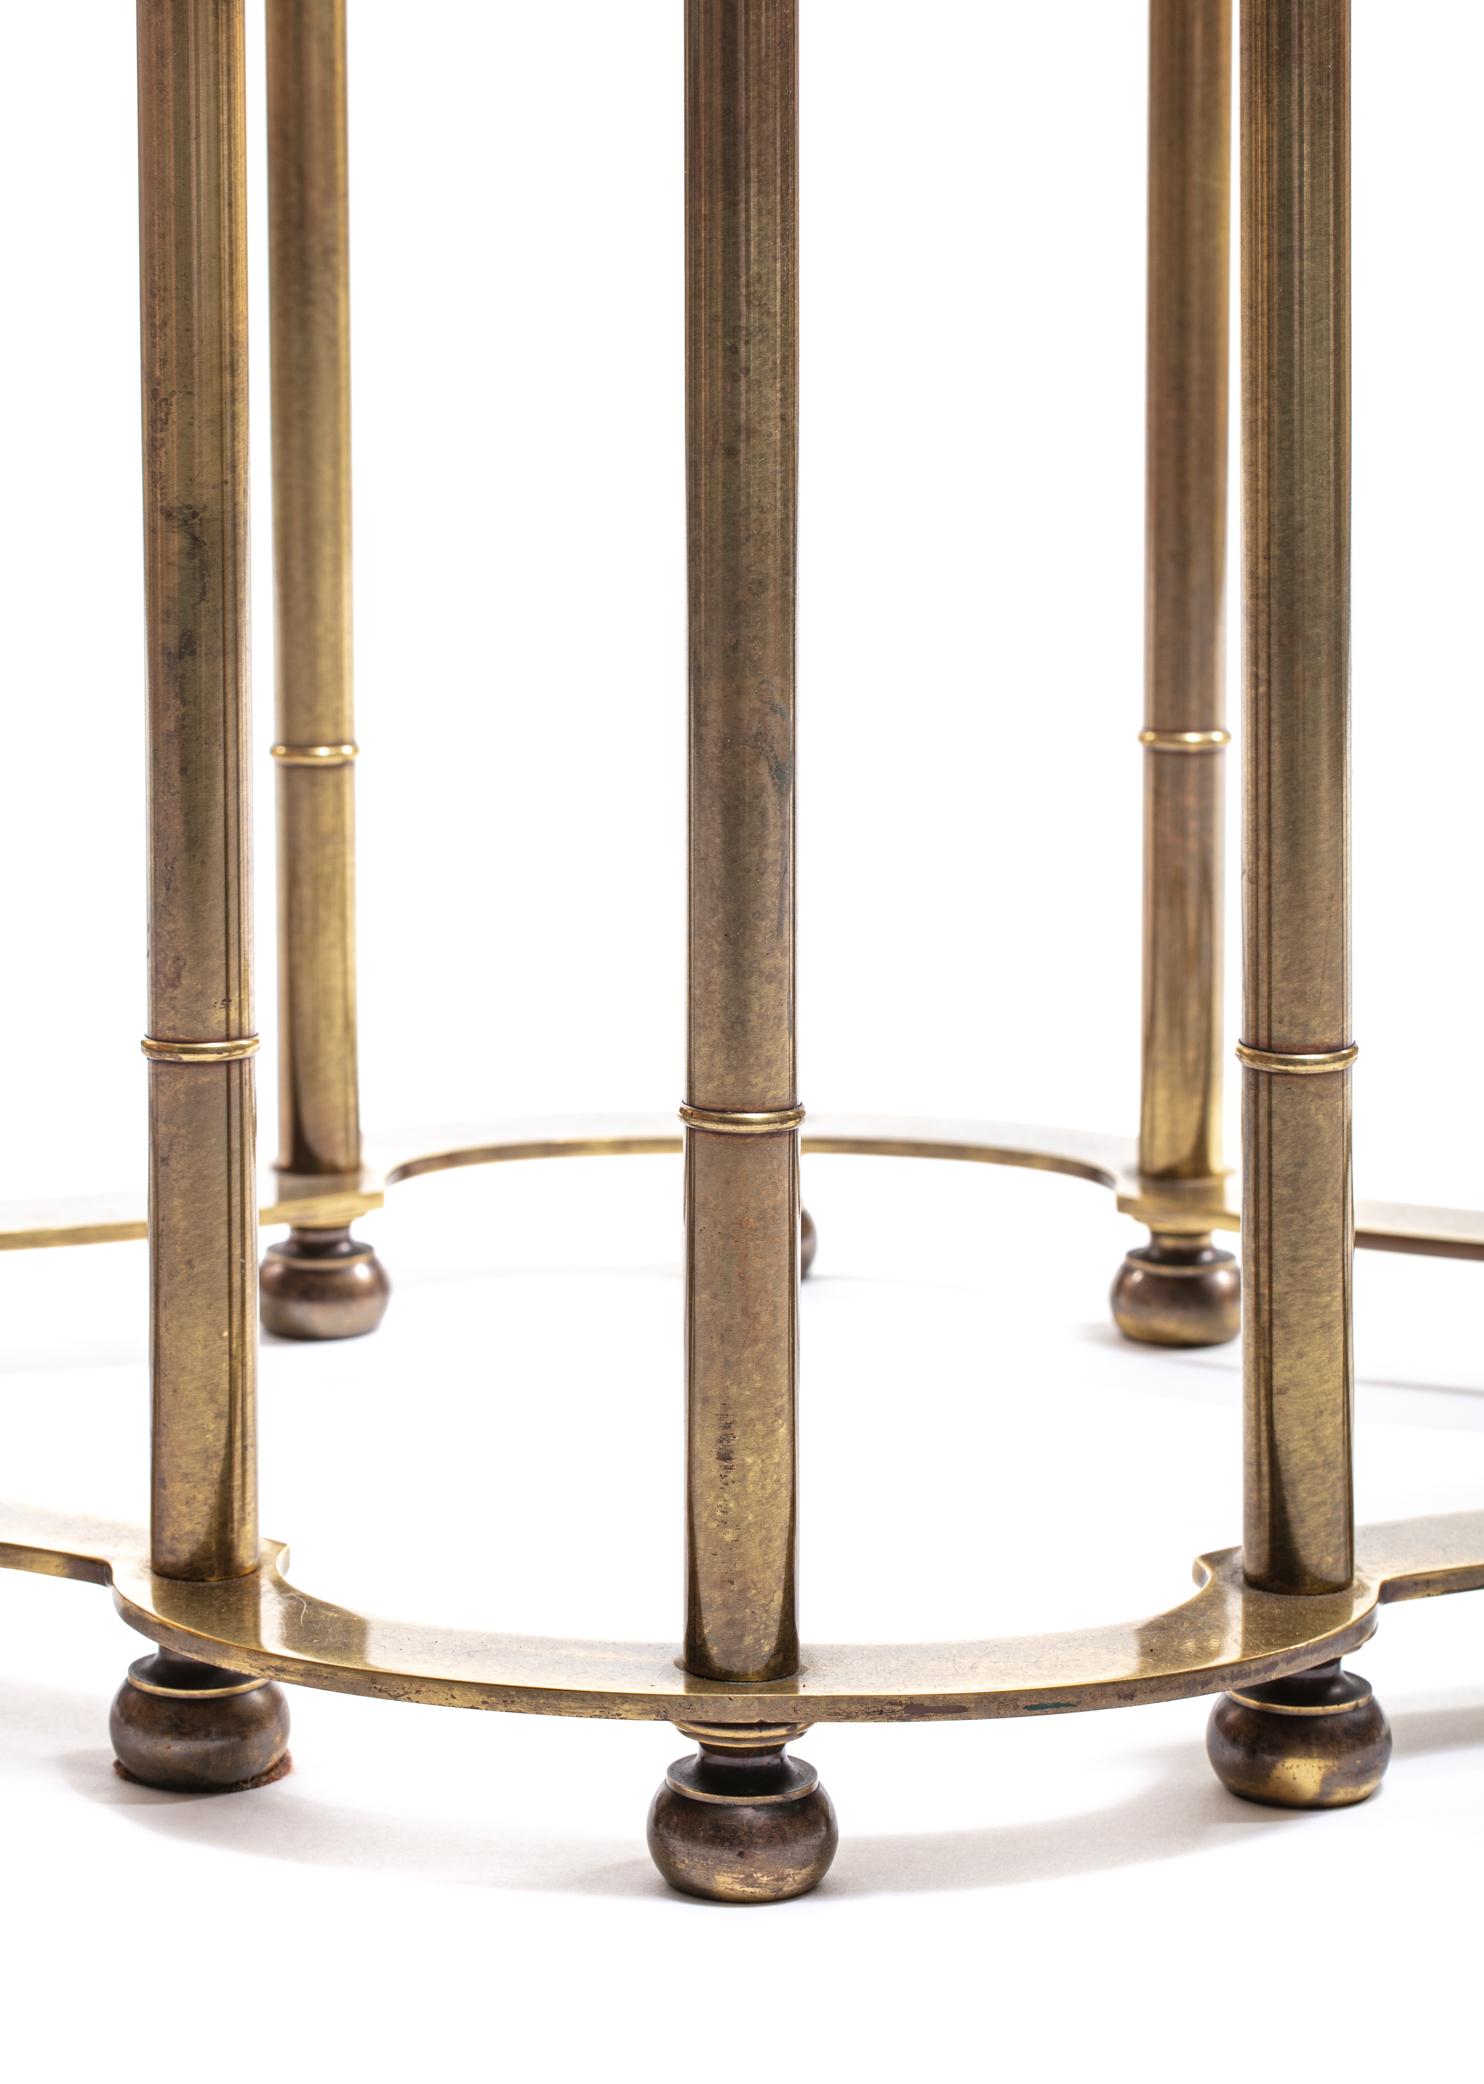 Patinated Mastercraft Brass Faux Bamboo Hollywood Regency Dining Table, circa 1970